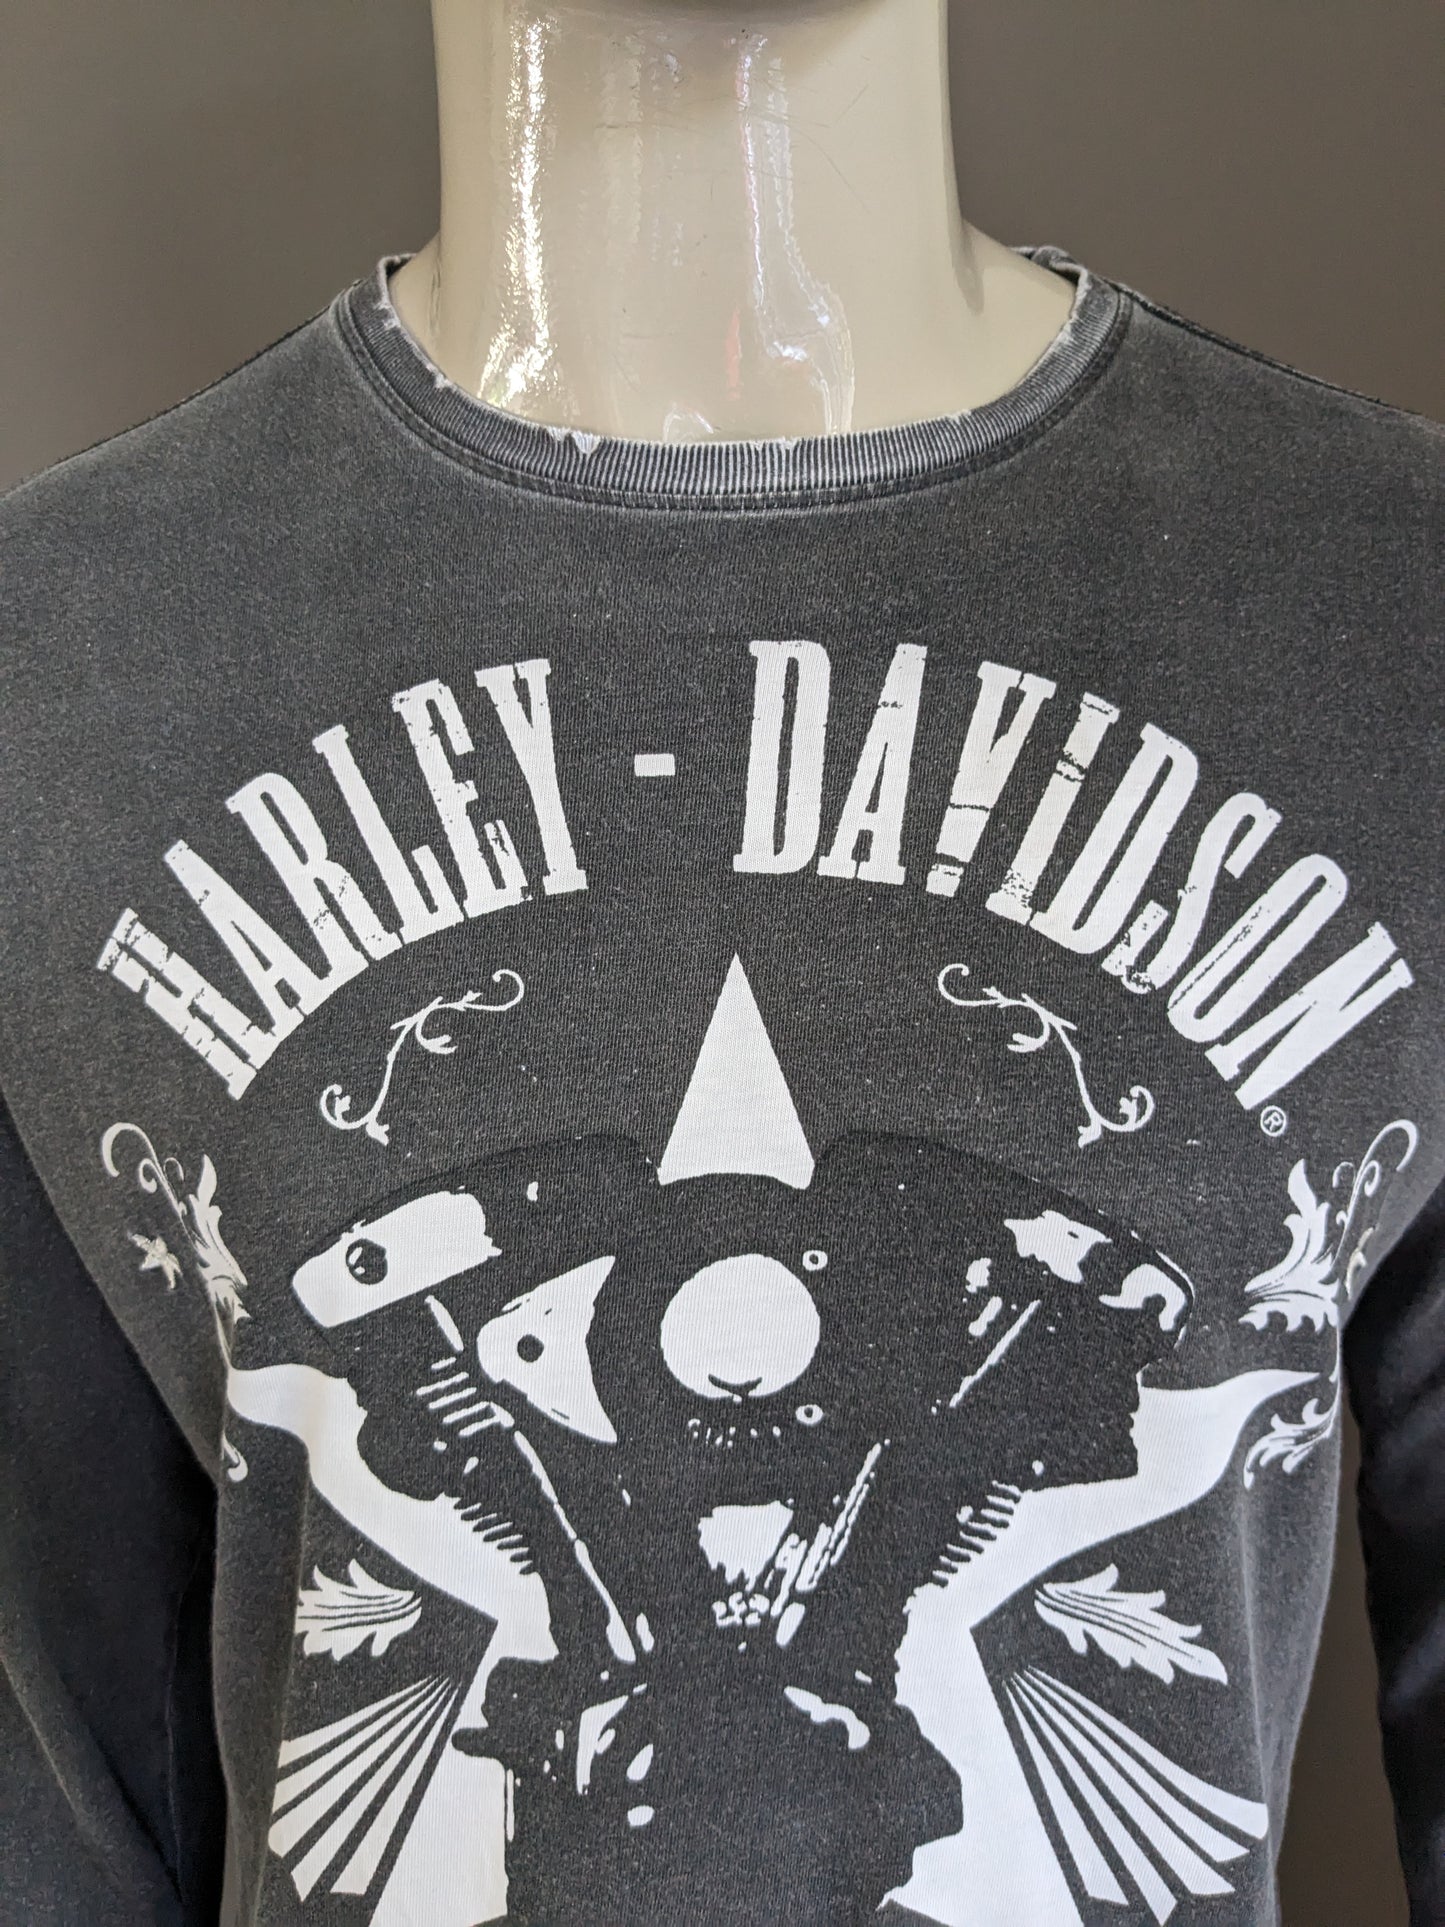 Harley Davidson Longsleeve. Gray white colored. Size L.